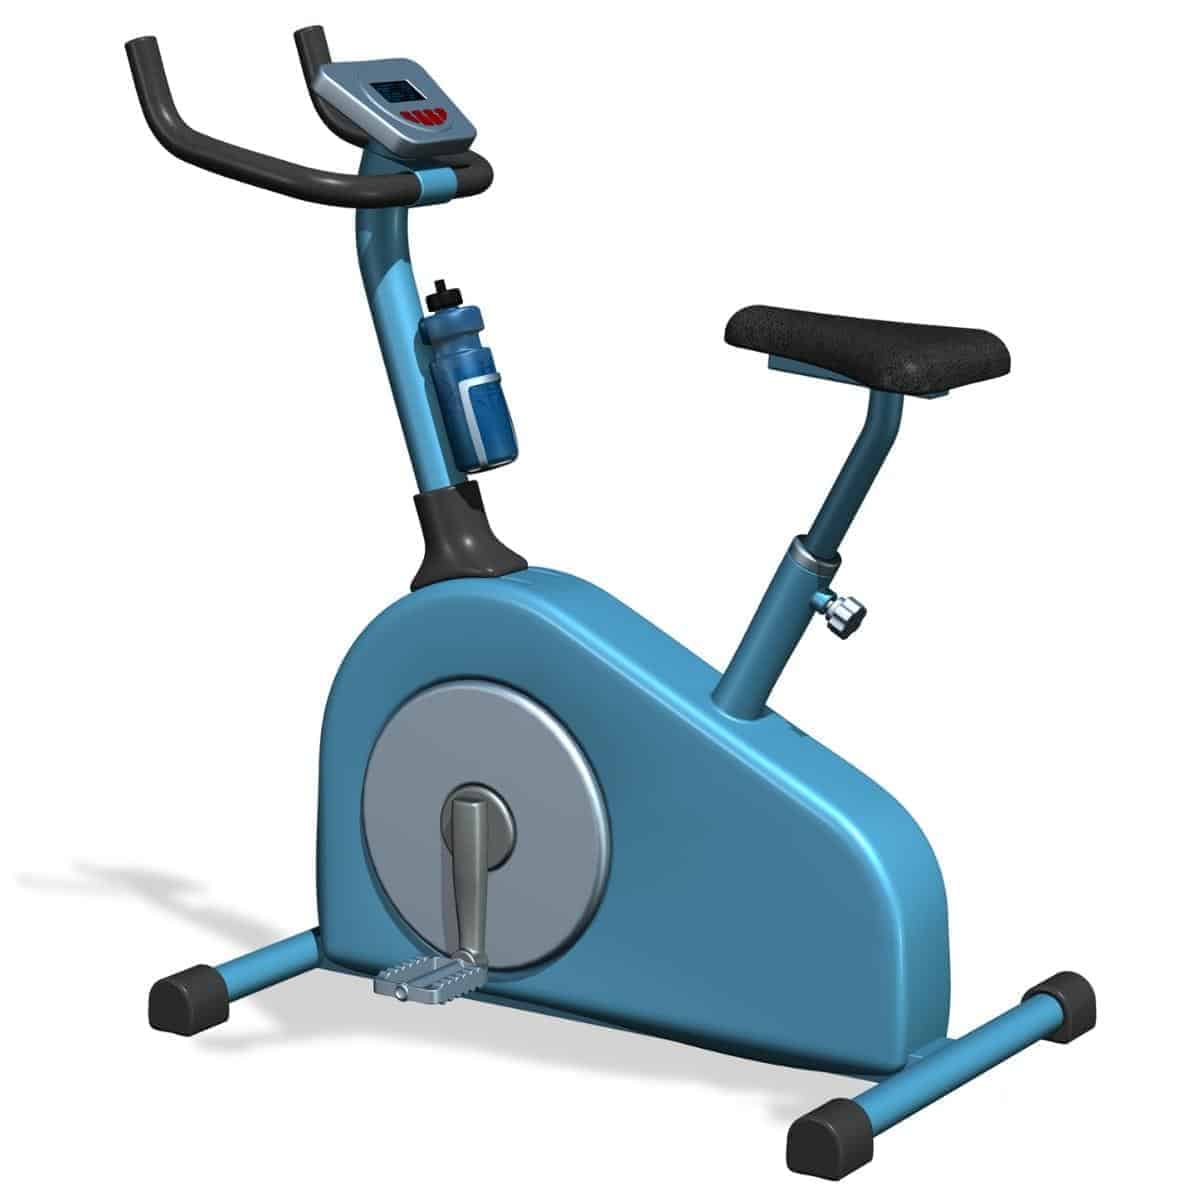 Large capacity exercise bikes for overweight people